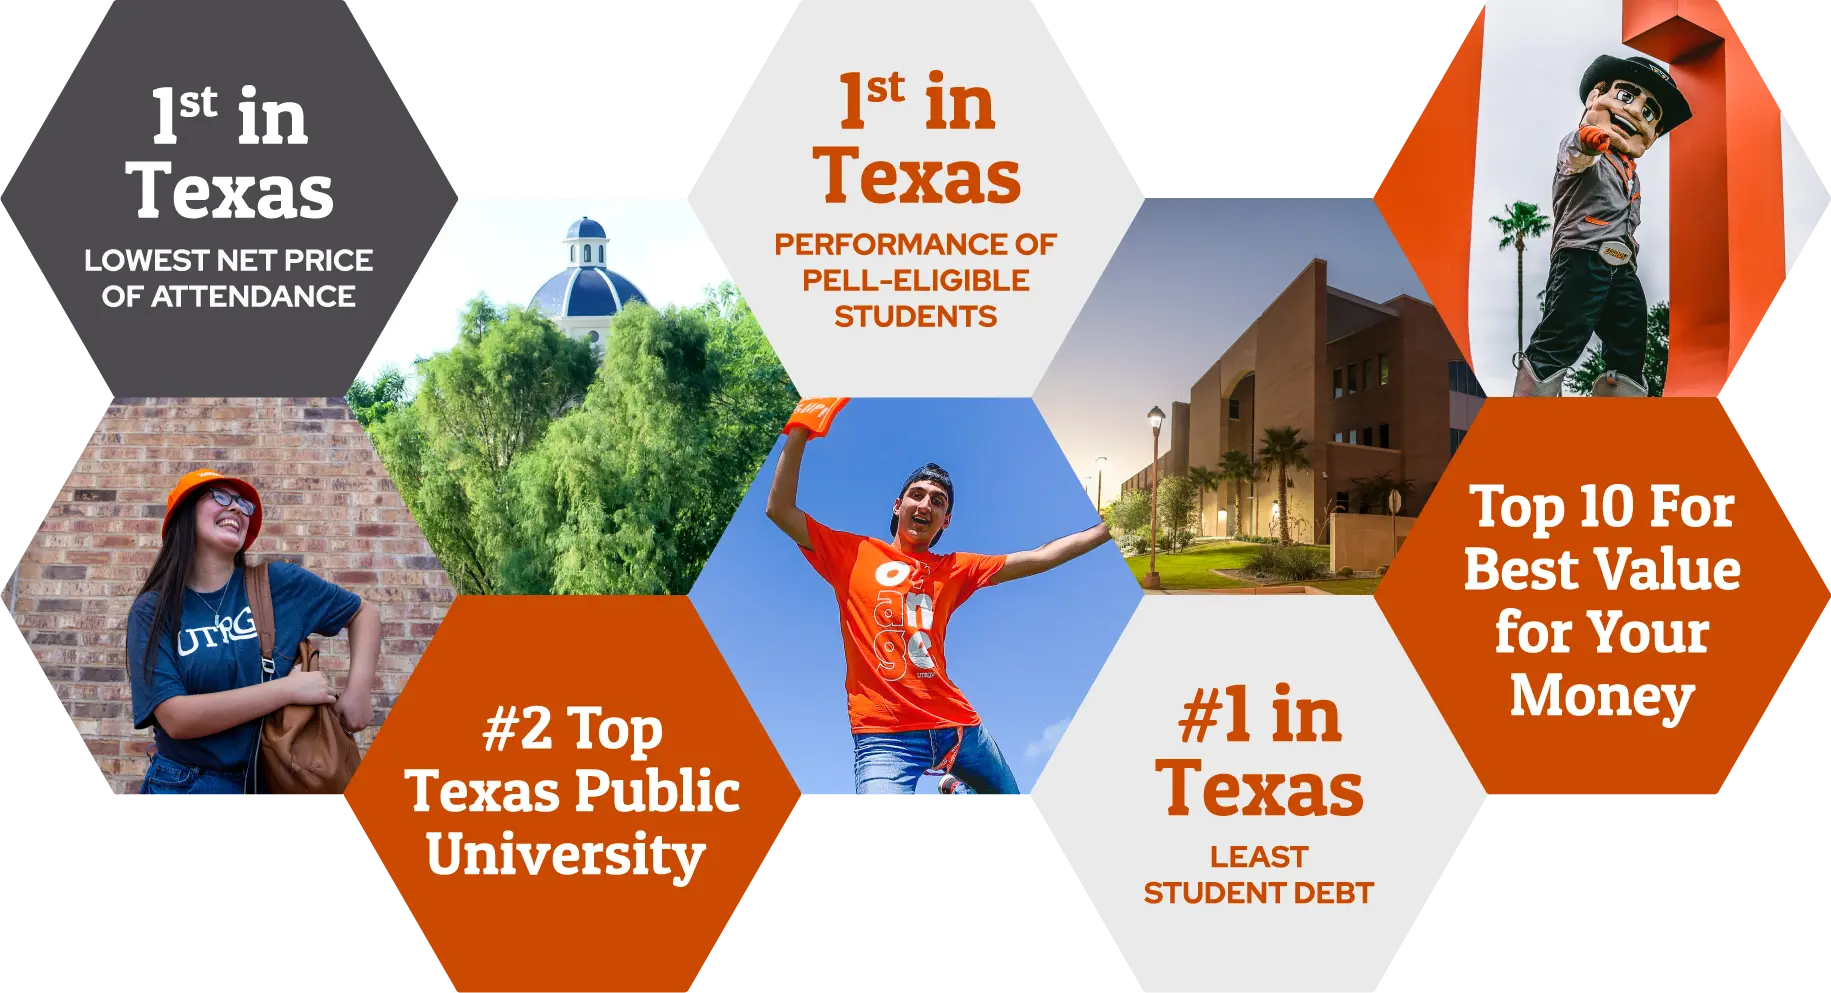 1st in Texas lowest net price of attendance | 1st in Texas performance of Pell-eligible students | #2 top Texas public university | #1 in Texas least student debt | top 10 for best value for your money